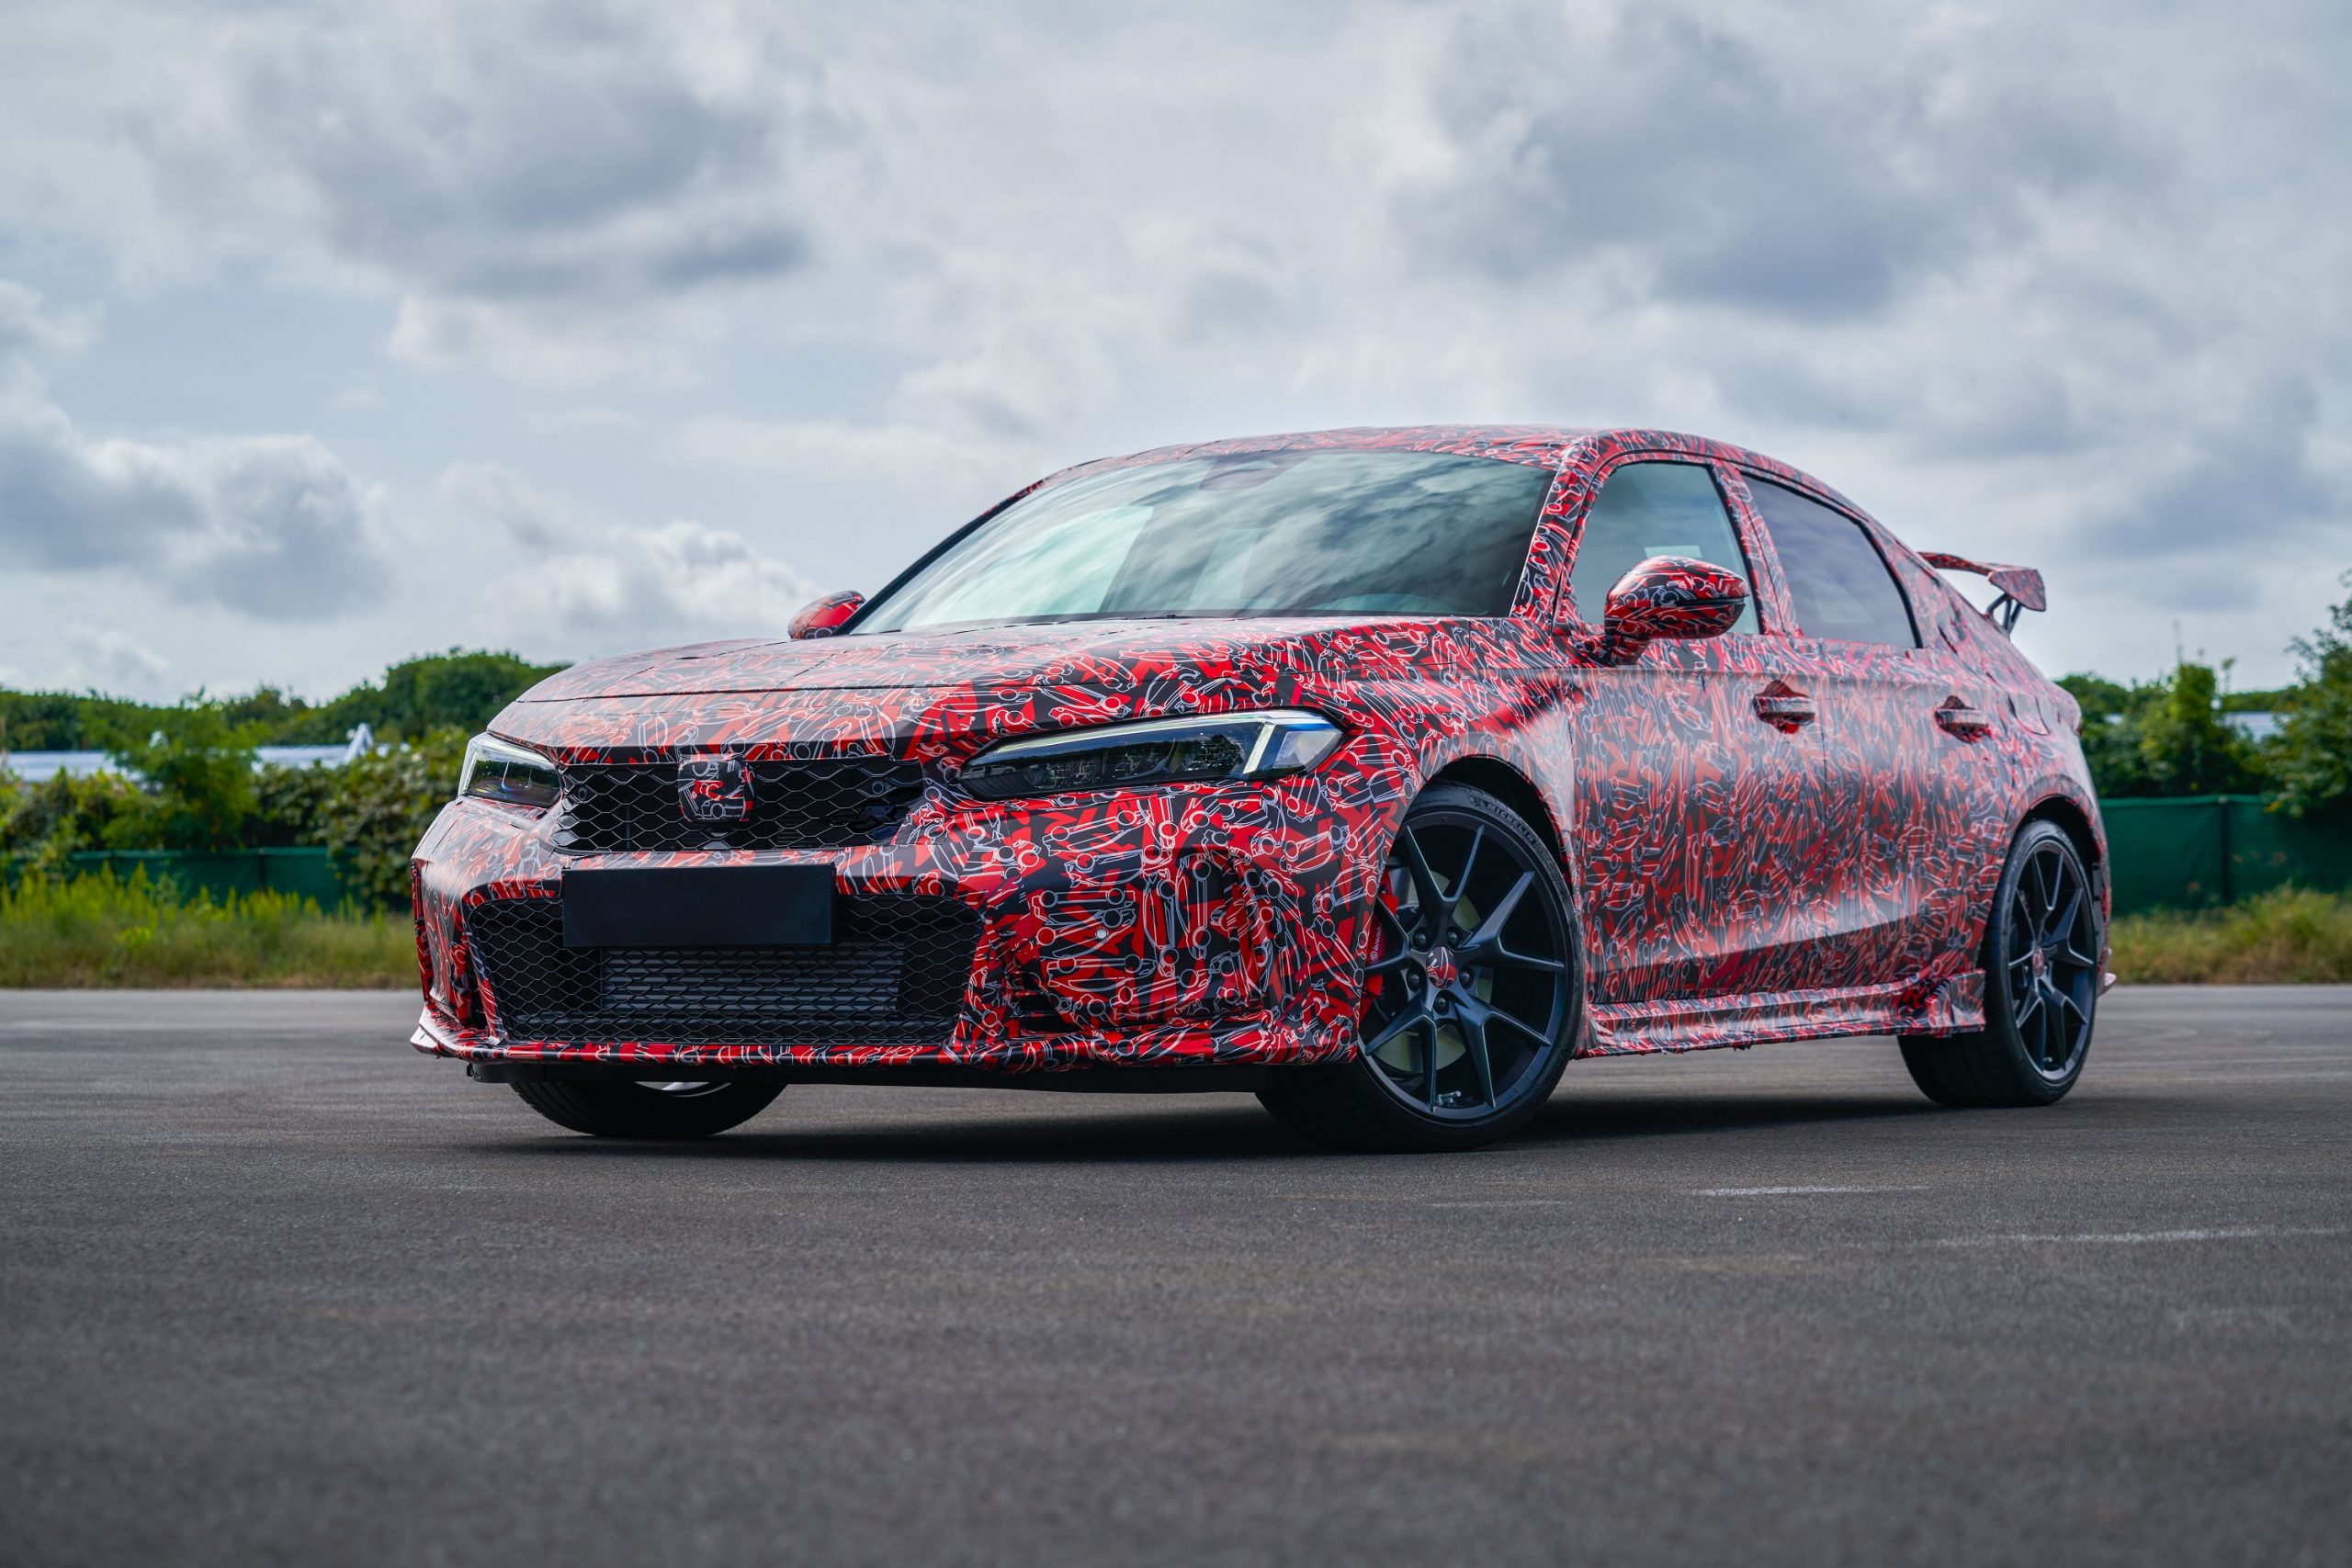 A red and white camouflaged Honda Civic Type R at the Nurburgring